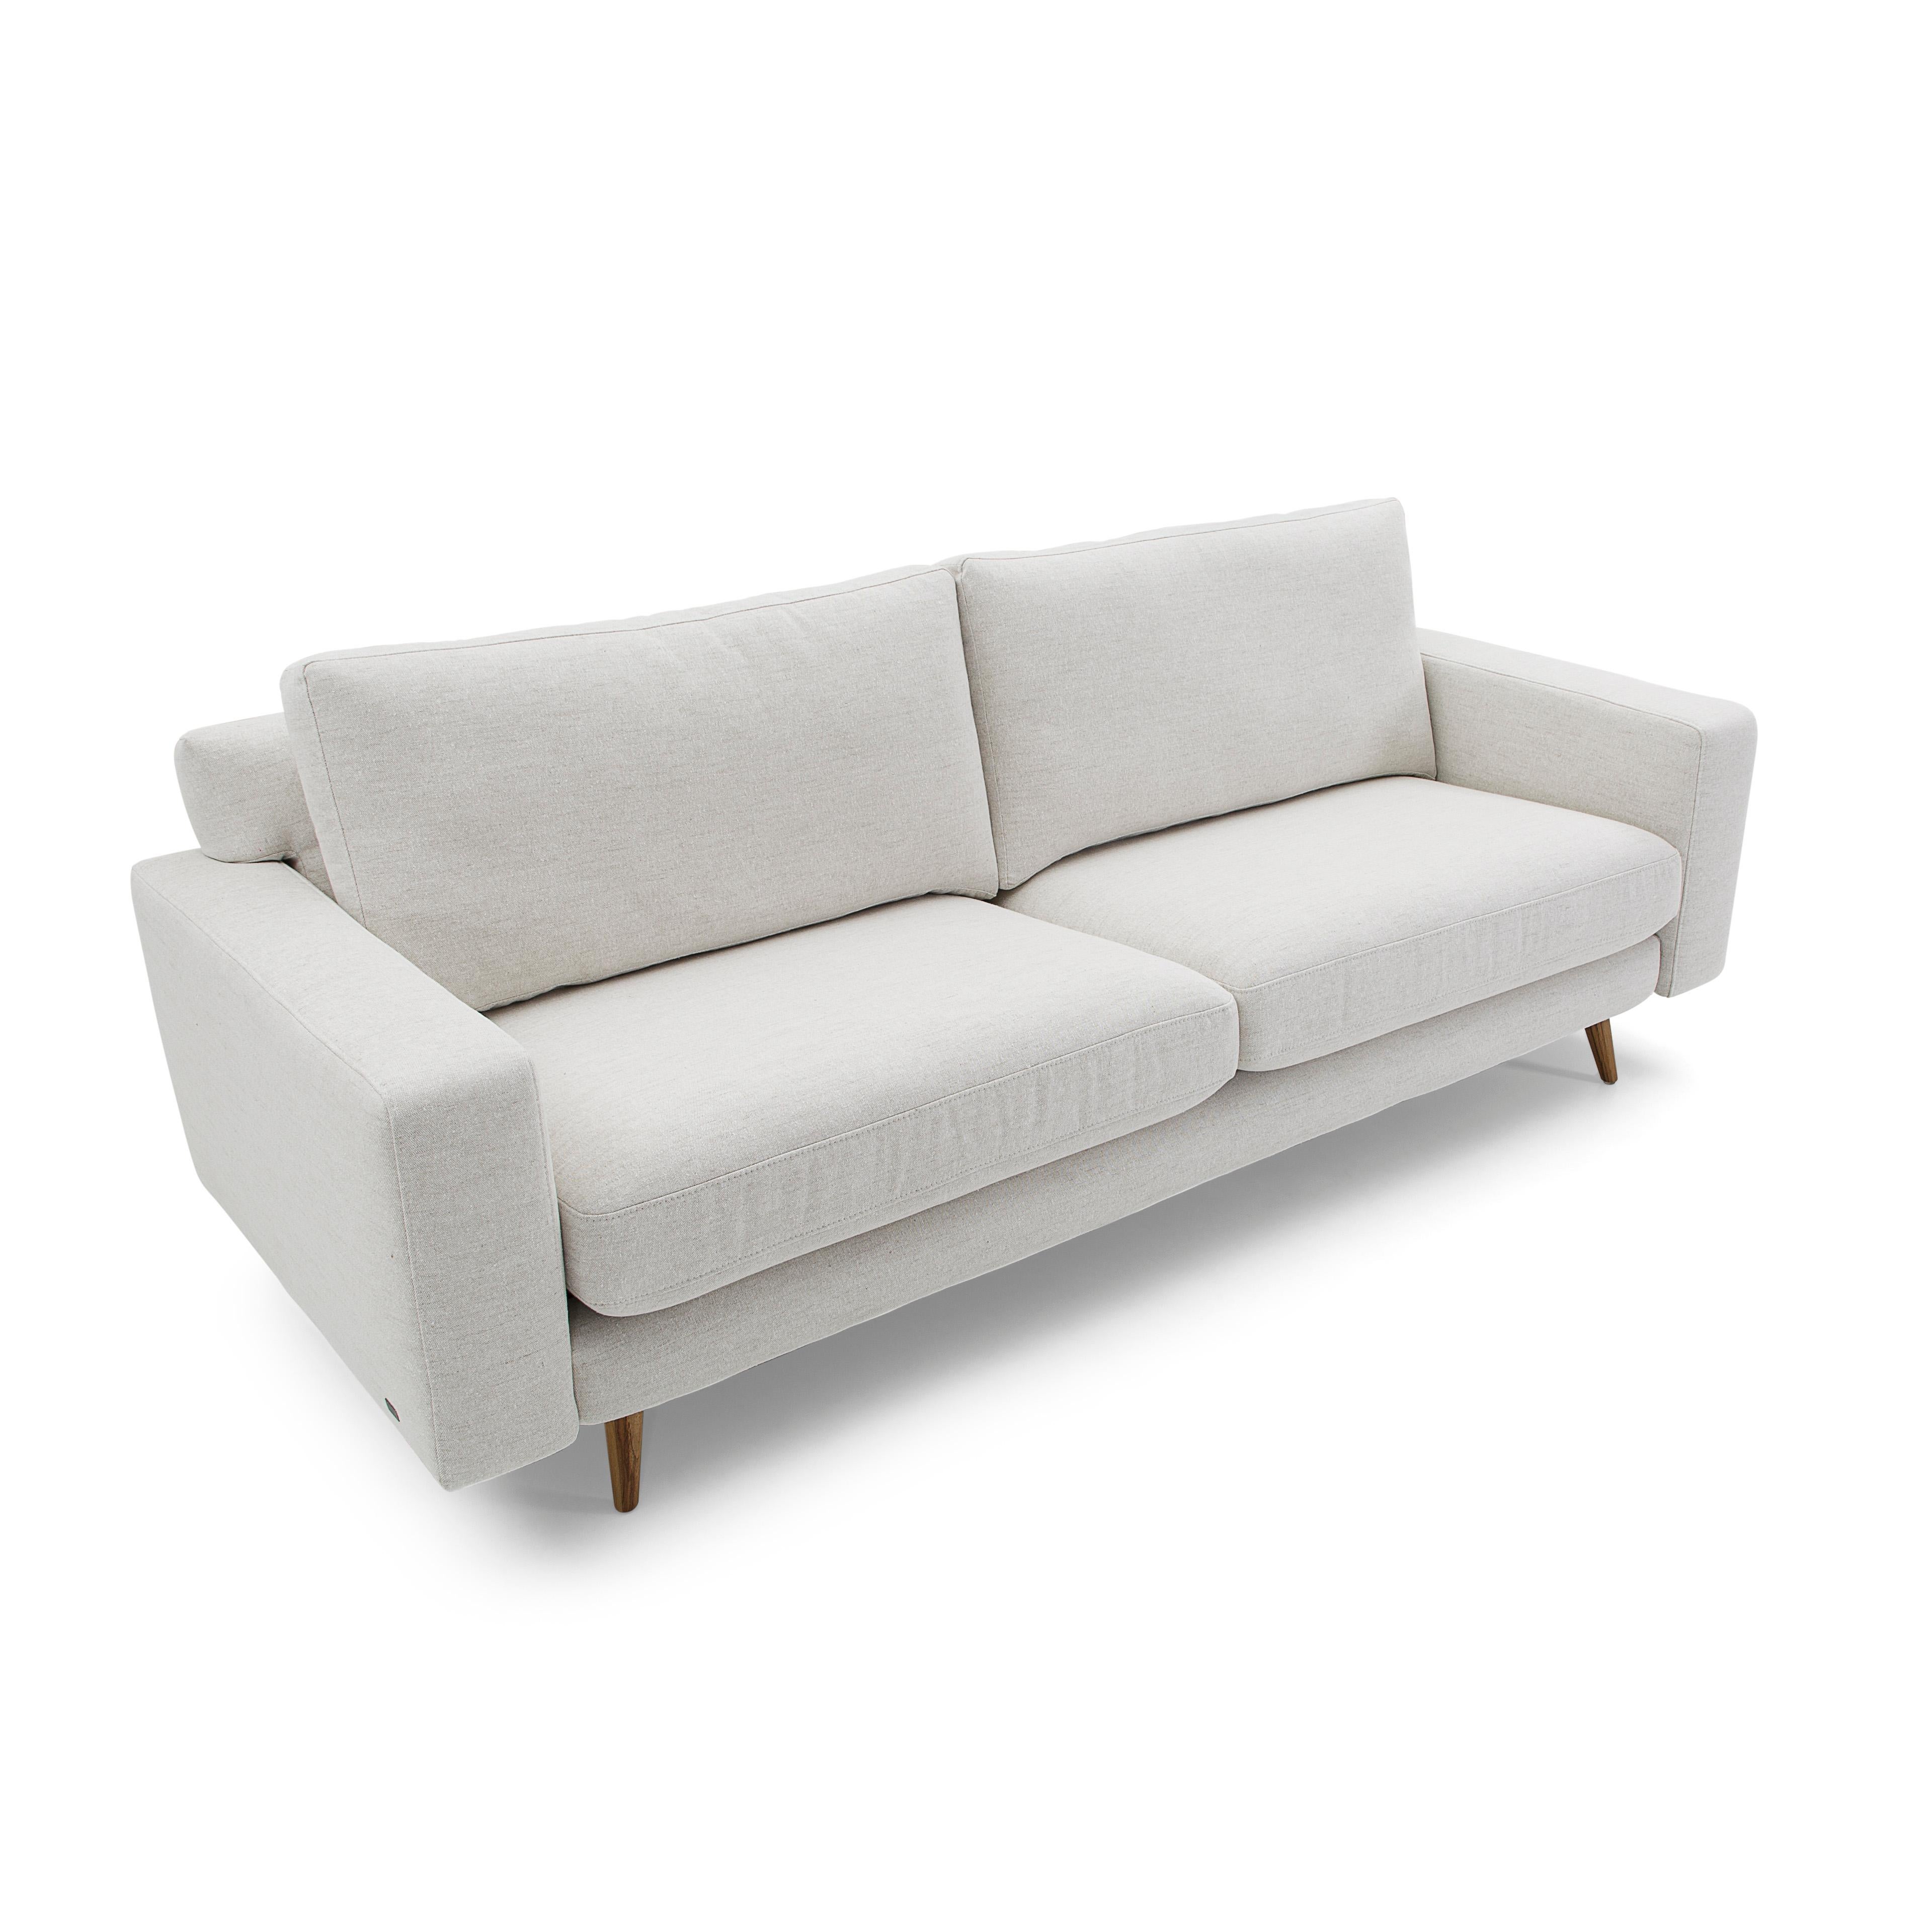 Brazilian Belt Sofa Upholstered in Off-White Fabric and Teak Wood Legs For Sale